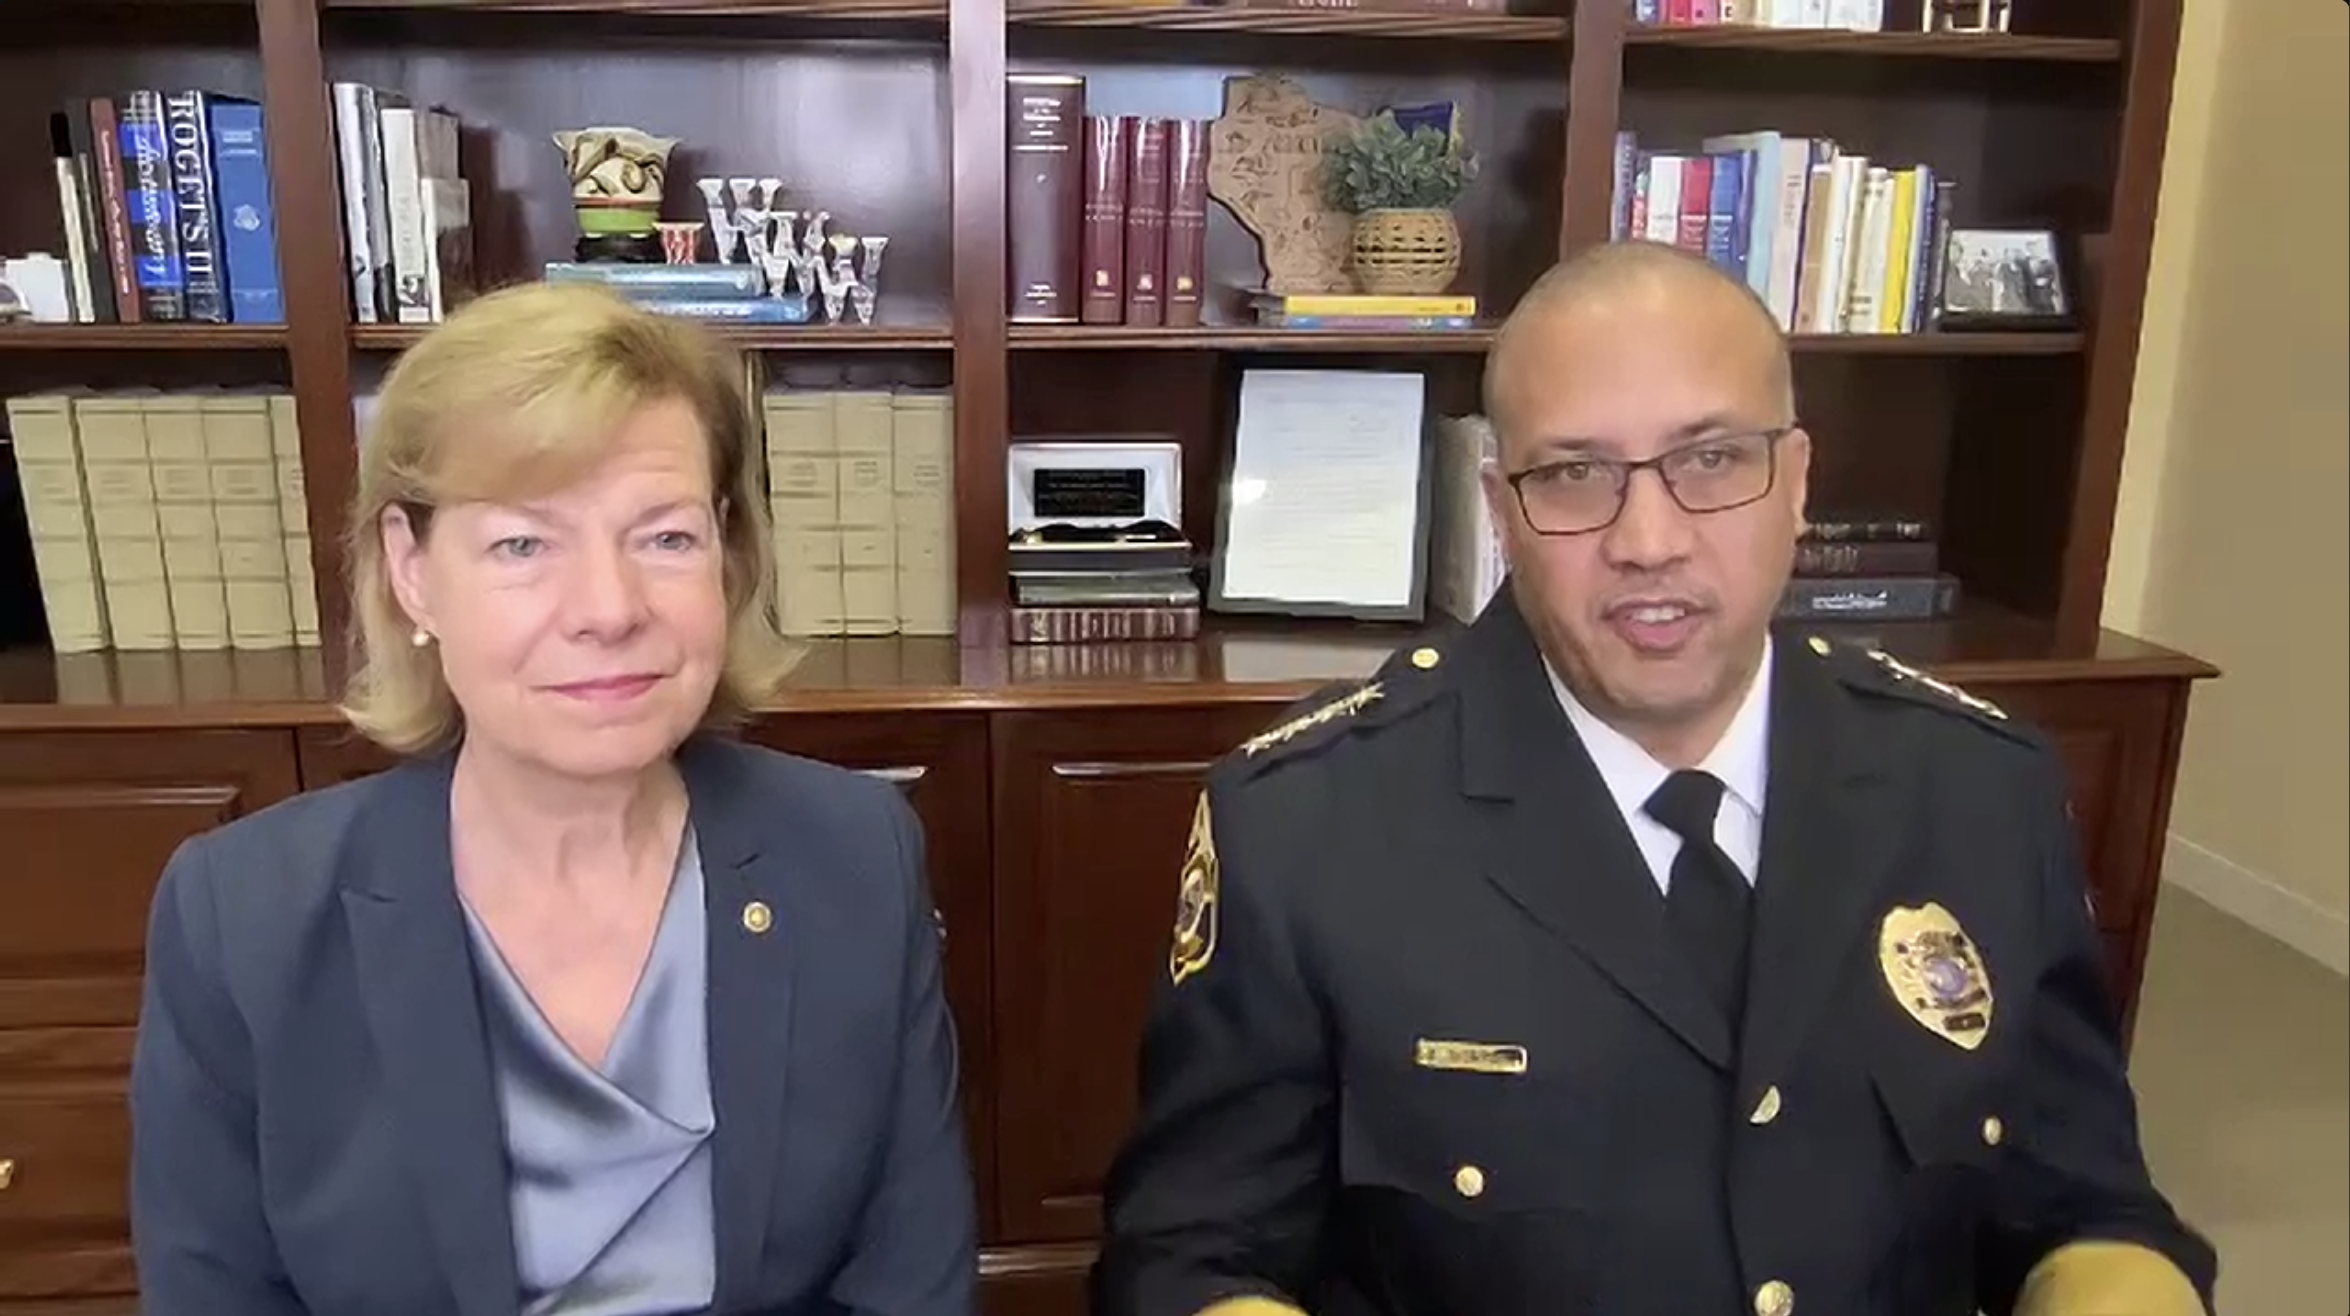 U.S. Sen. Tammy Baldwin and Waukesha Police Chief Daniel Thompson sit in an office in Washington D.C. during a Zoom call.